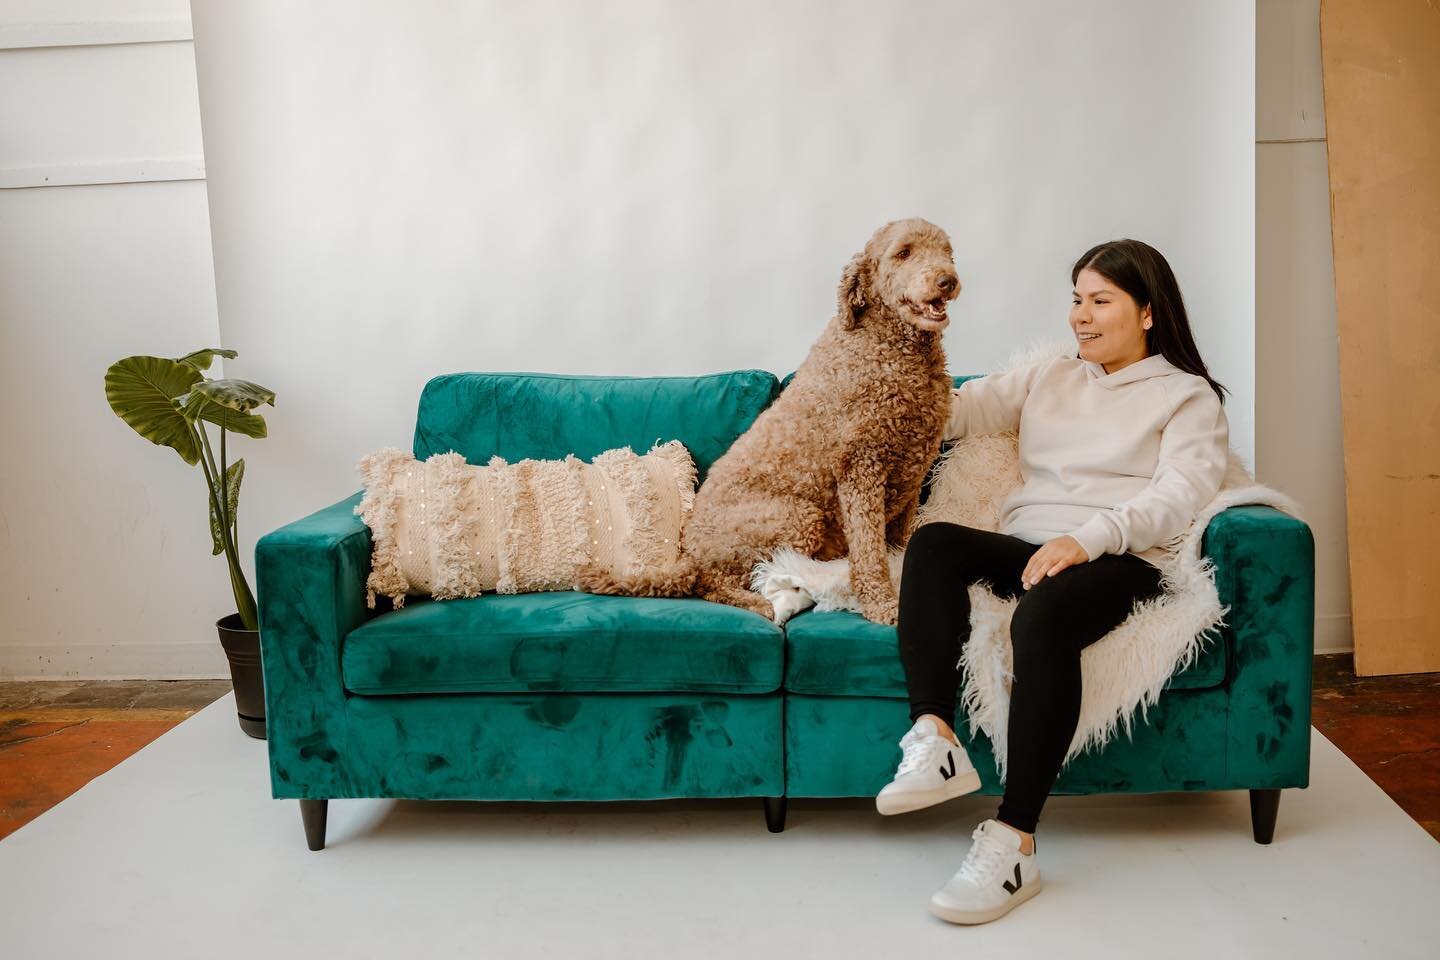 Therapy from the comfort of your home (and with your fur baby by your side) 🛋 
.
💻 You may choose virtual therapy if:
✦ You work long hours.
✦ You are traveling and want to continue your therapy services while you are out of town.
✦ You are a stay-